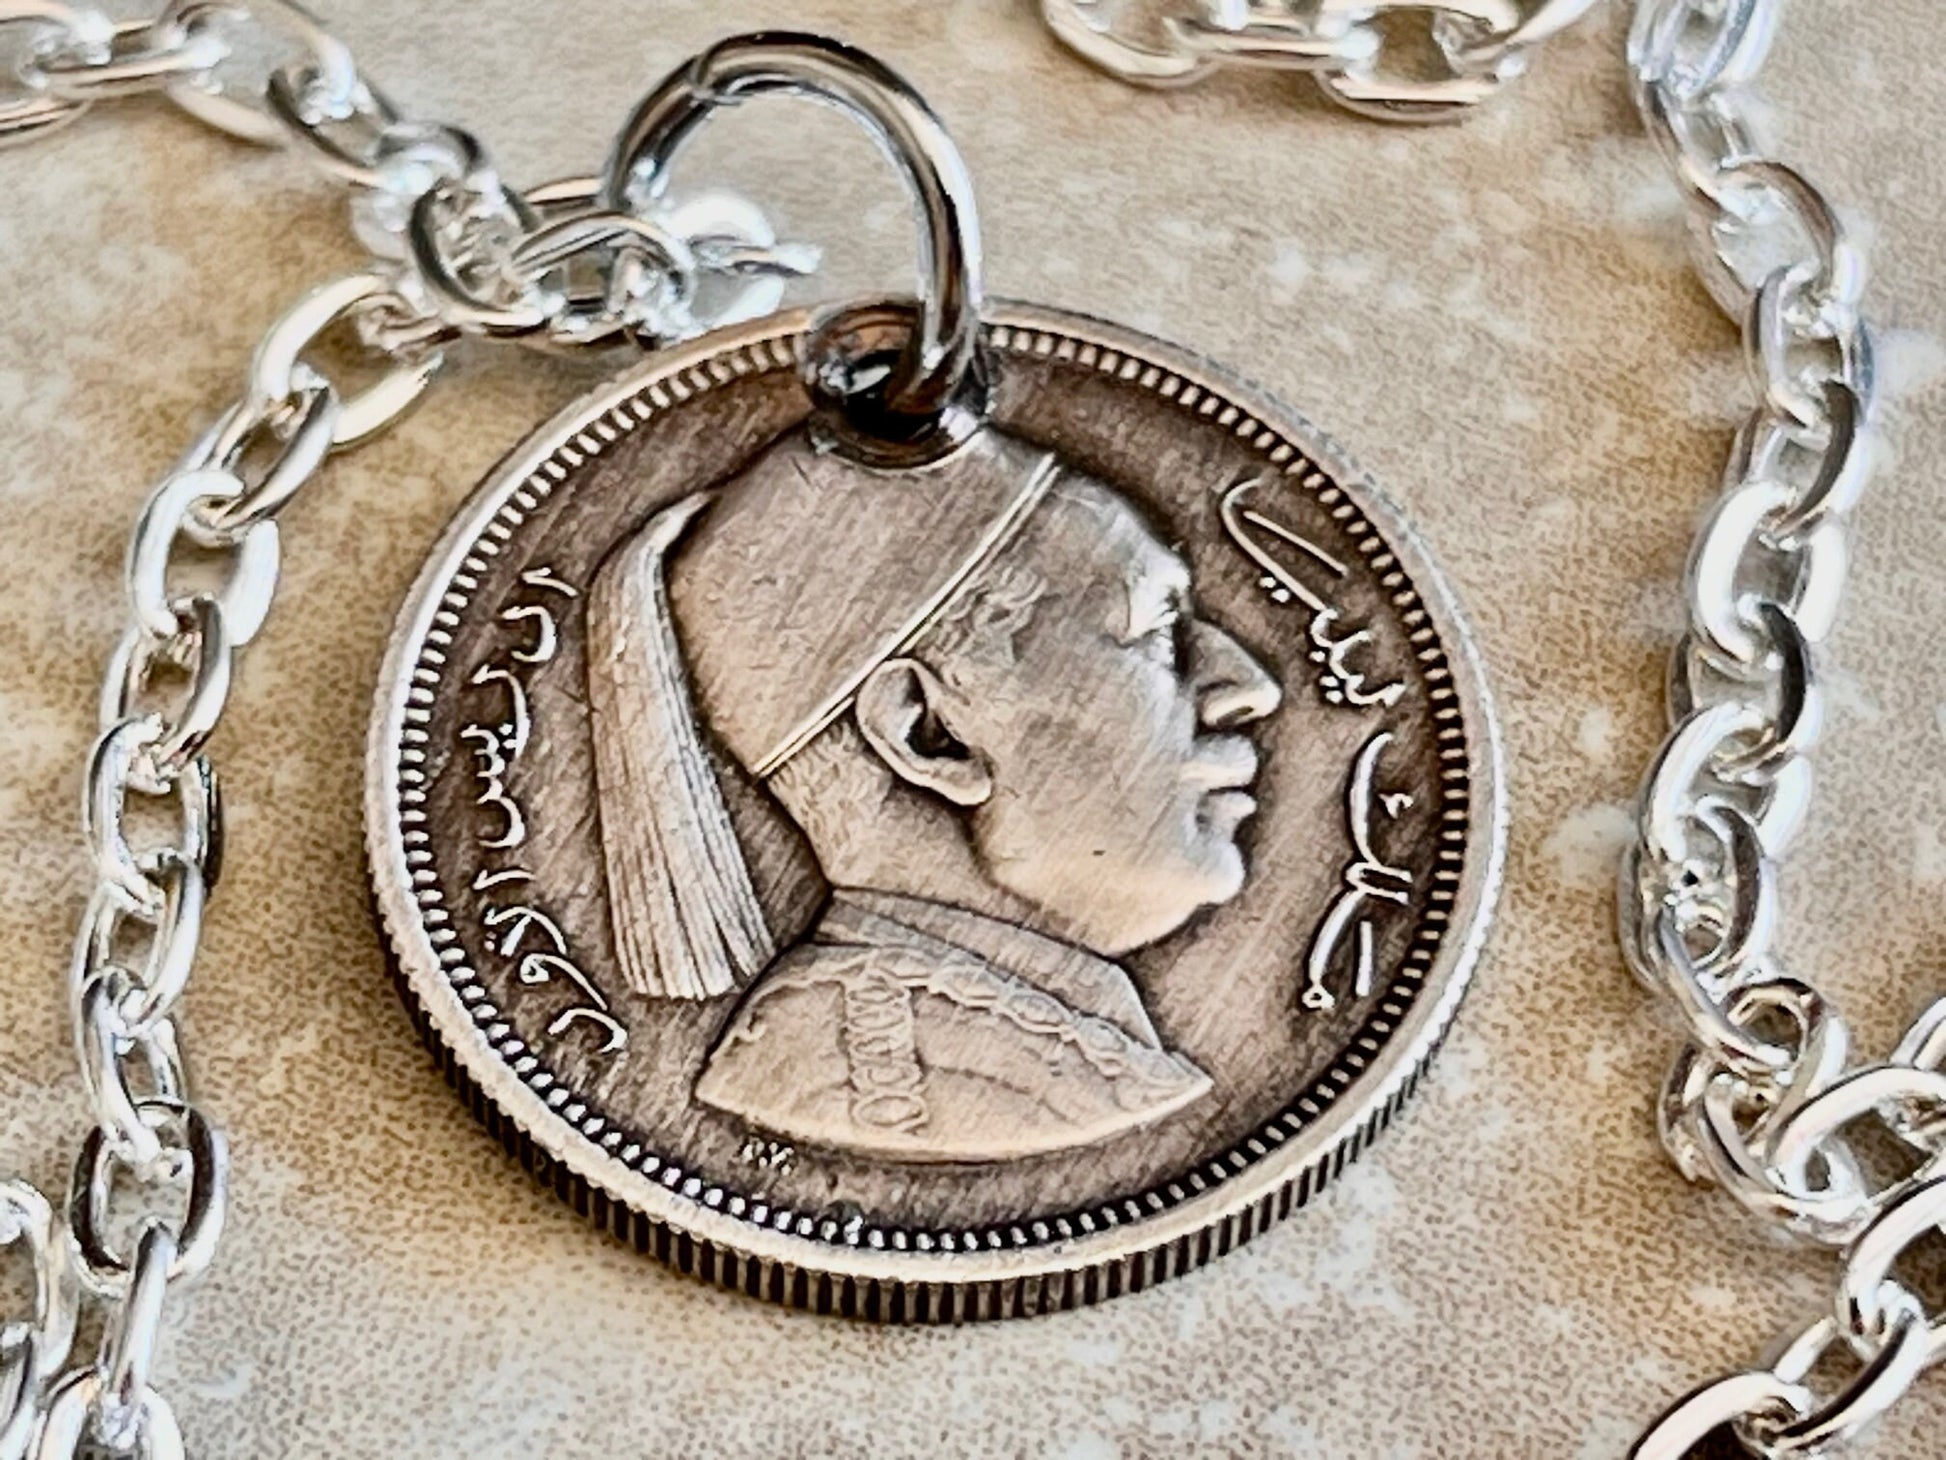 Libya Coin Pendant Libyan 1 Piastres Personal Necklace Old Vintage Handmade Jewelry Gift Friend Charm For Him Her World Coin Collector